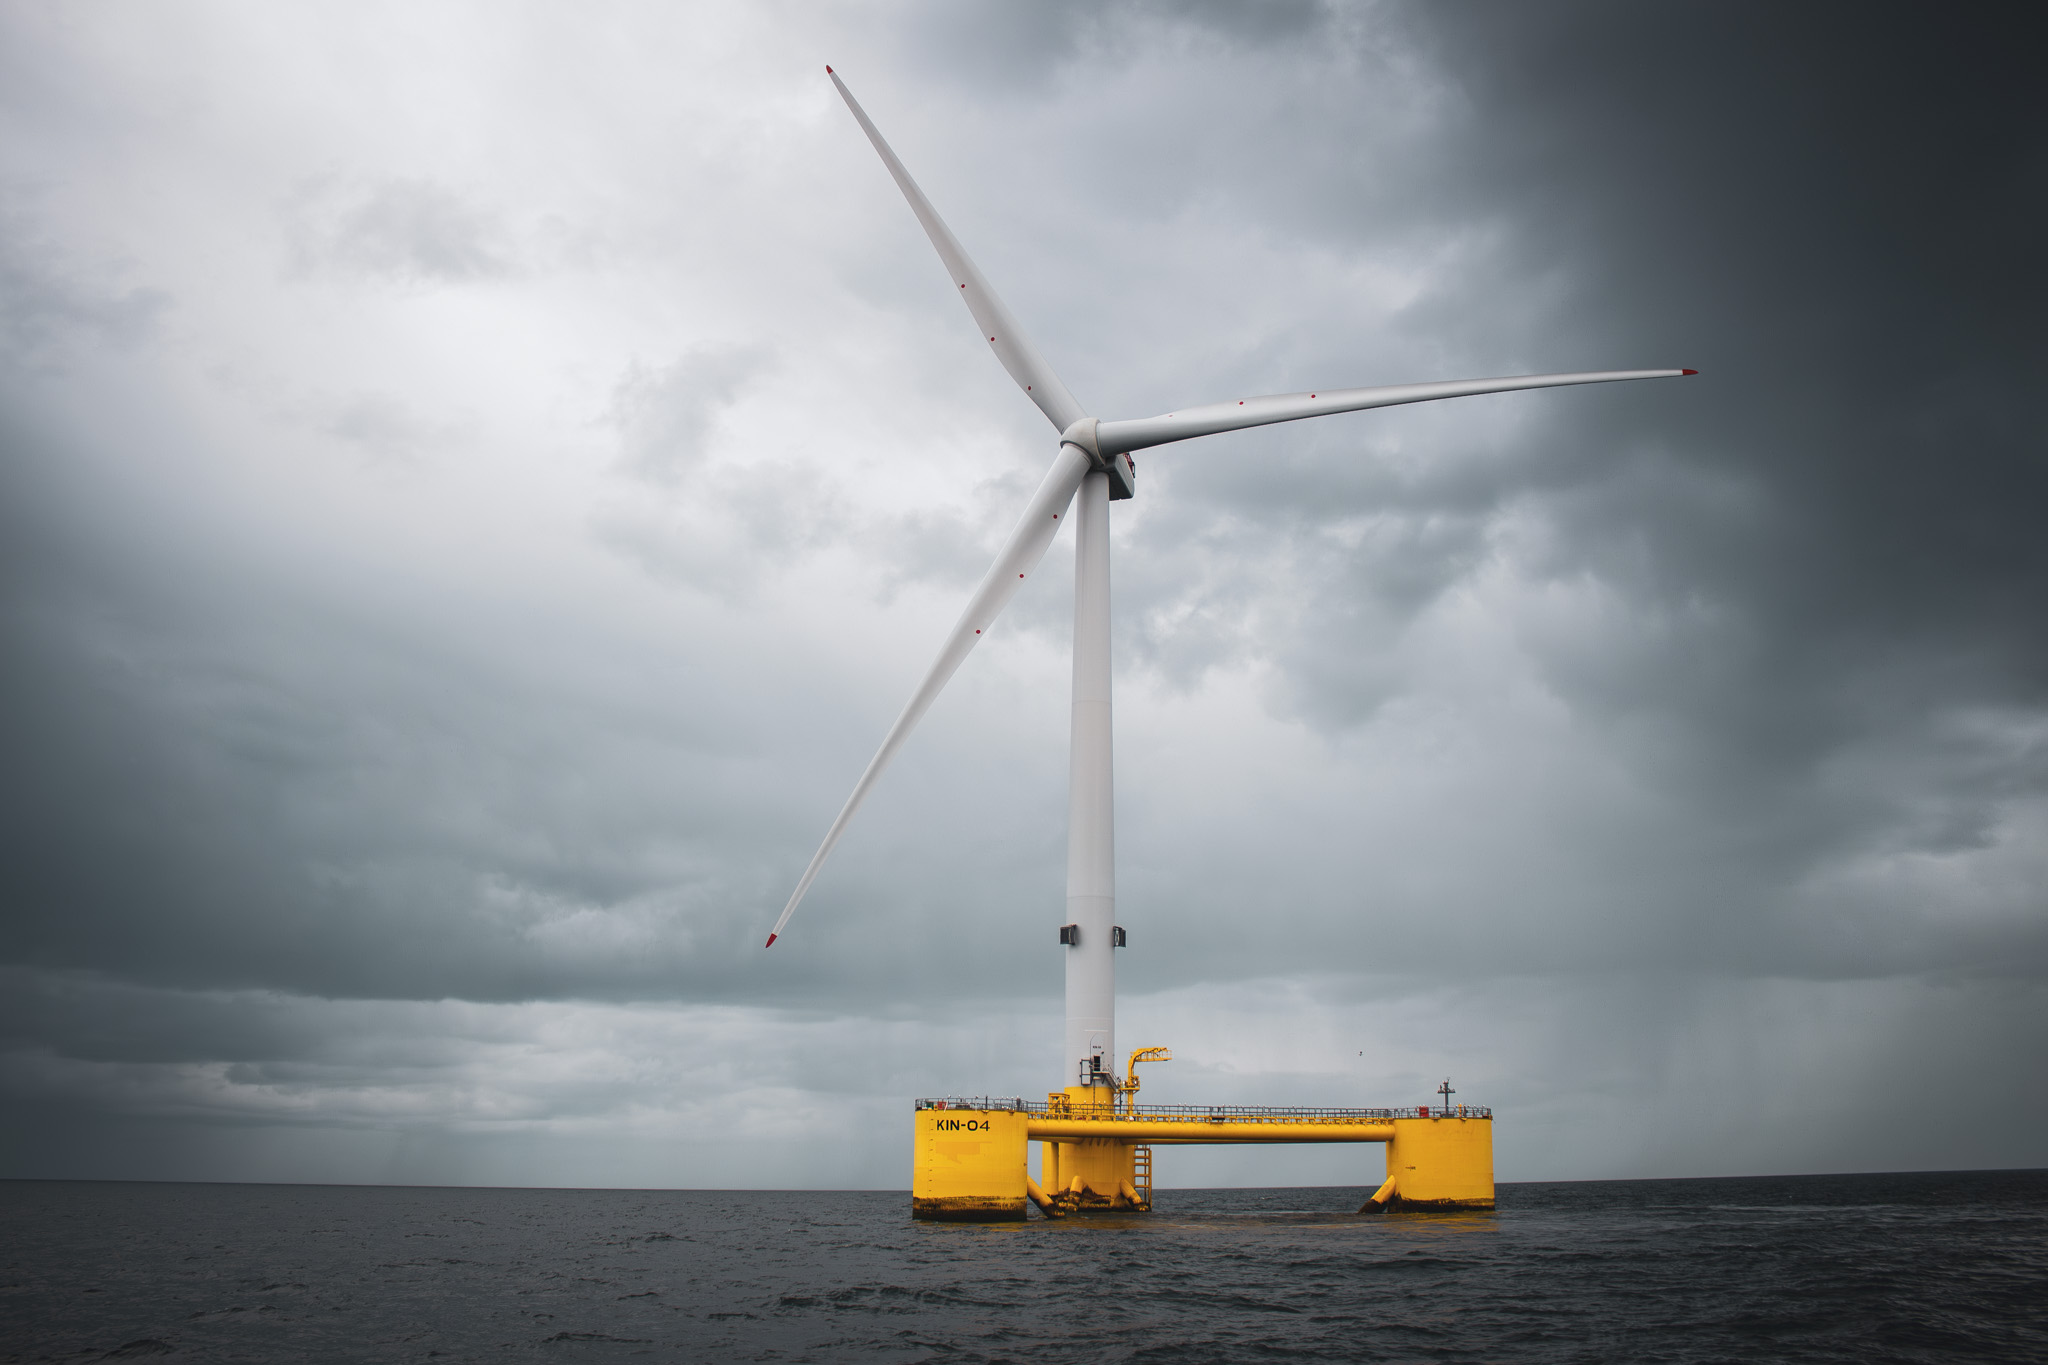 Celtic sea floating offshore windfarm, white cross, submits onshore planning application